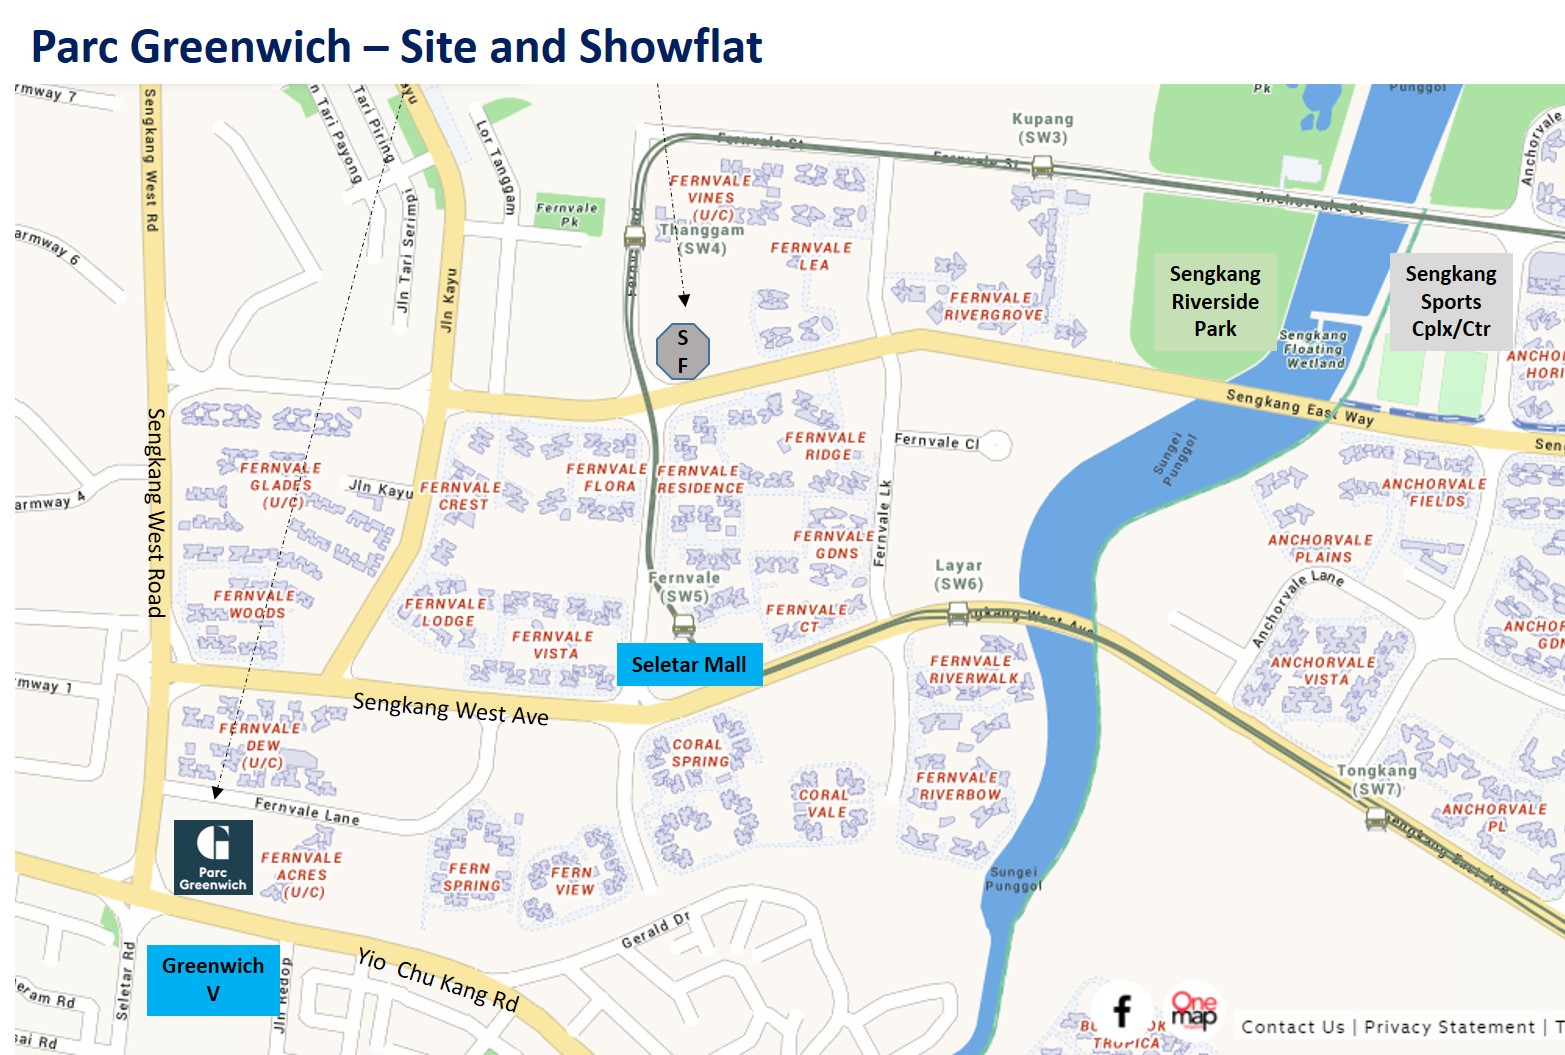 Parc Greenwich Site and Showflat Location